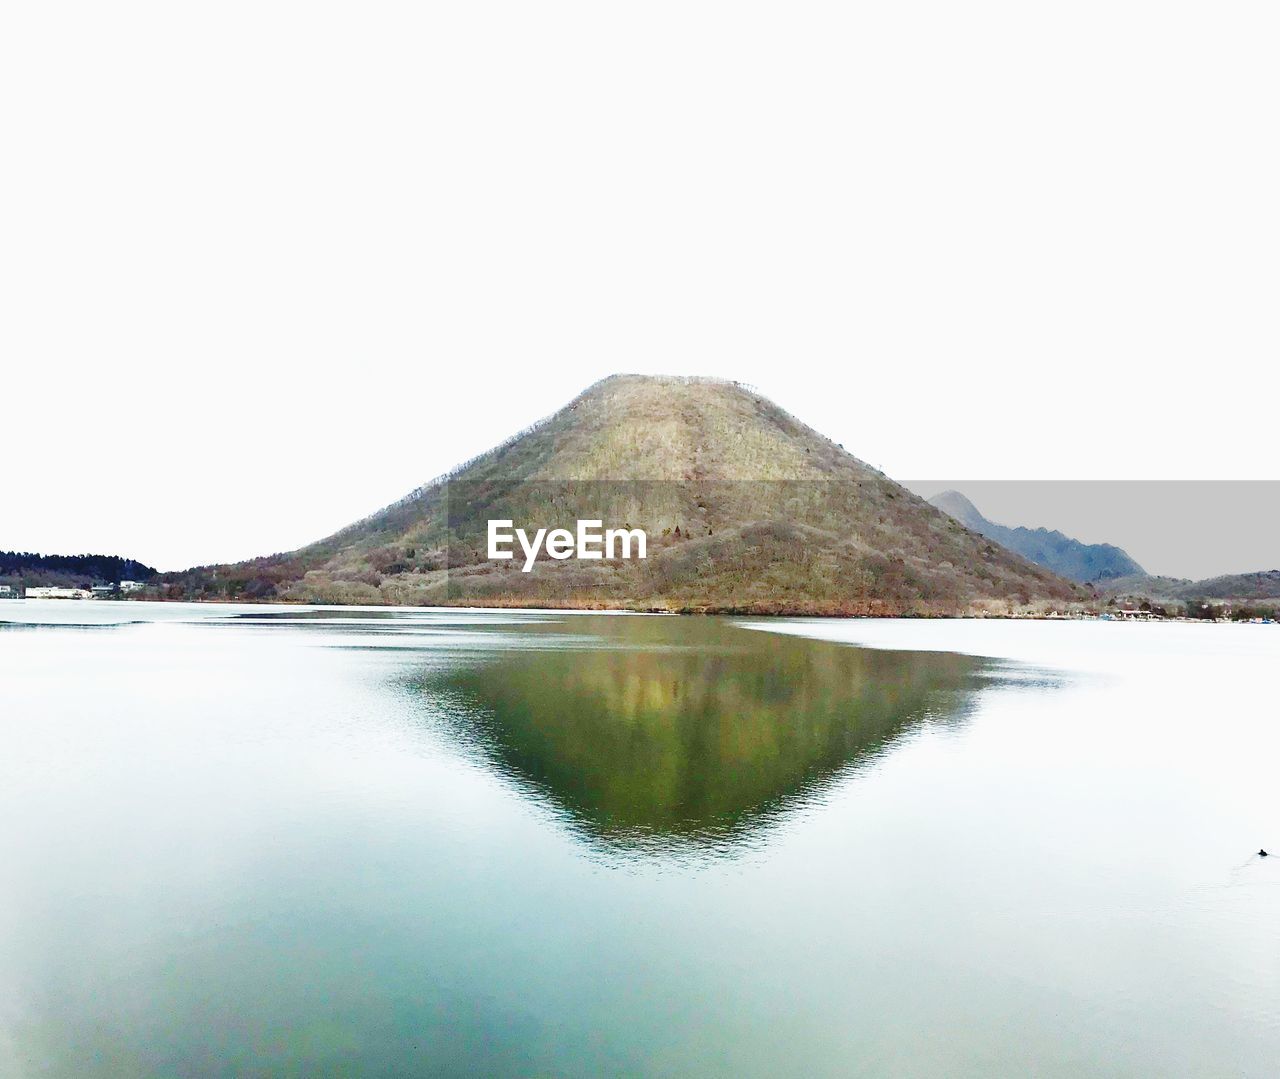 SCENIC VIEW OF LAKE BY MOUNTAIN AGAINST CLEAR SKY